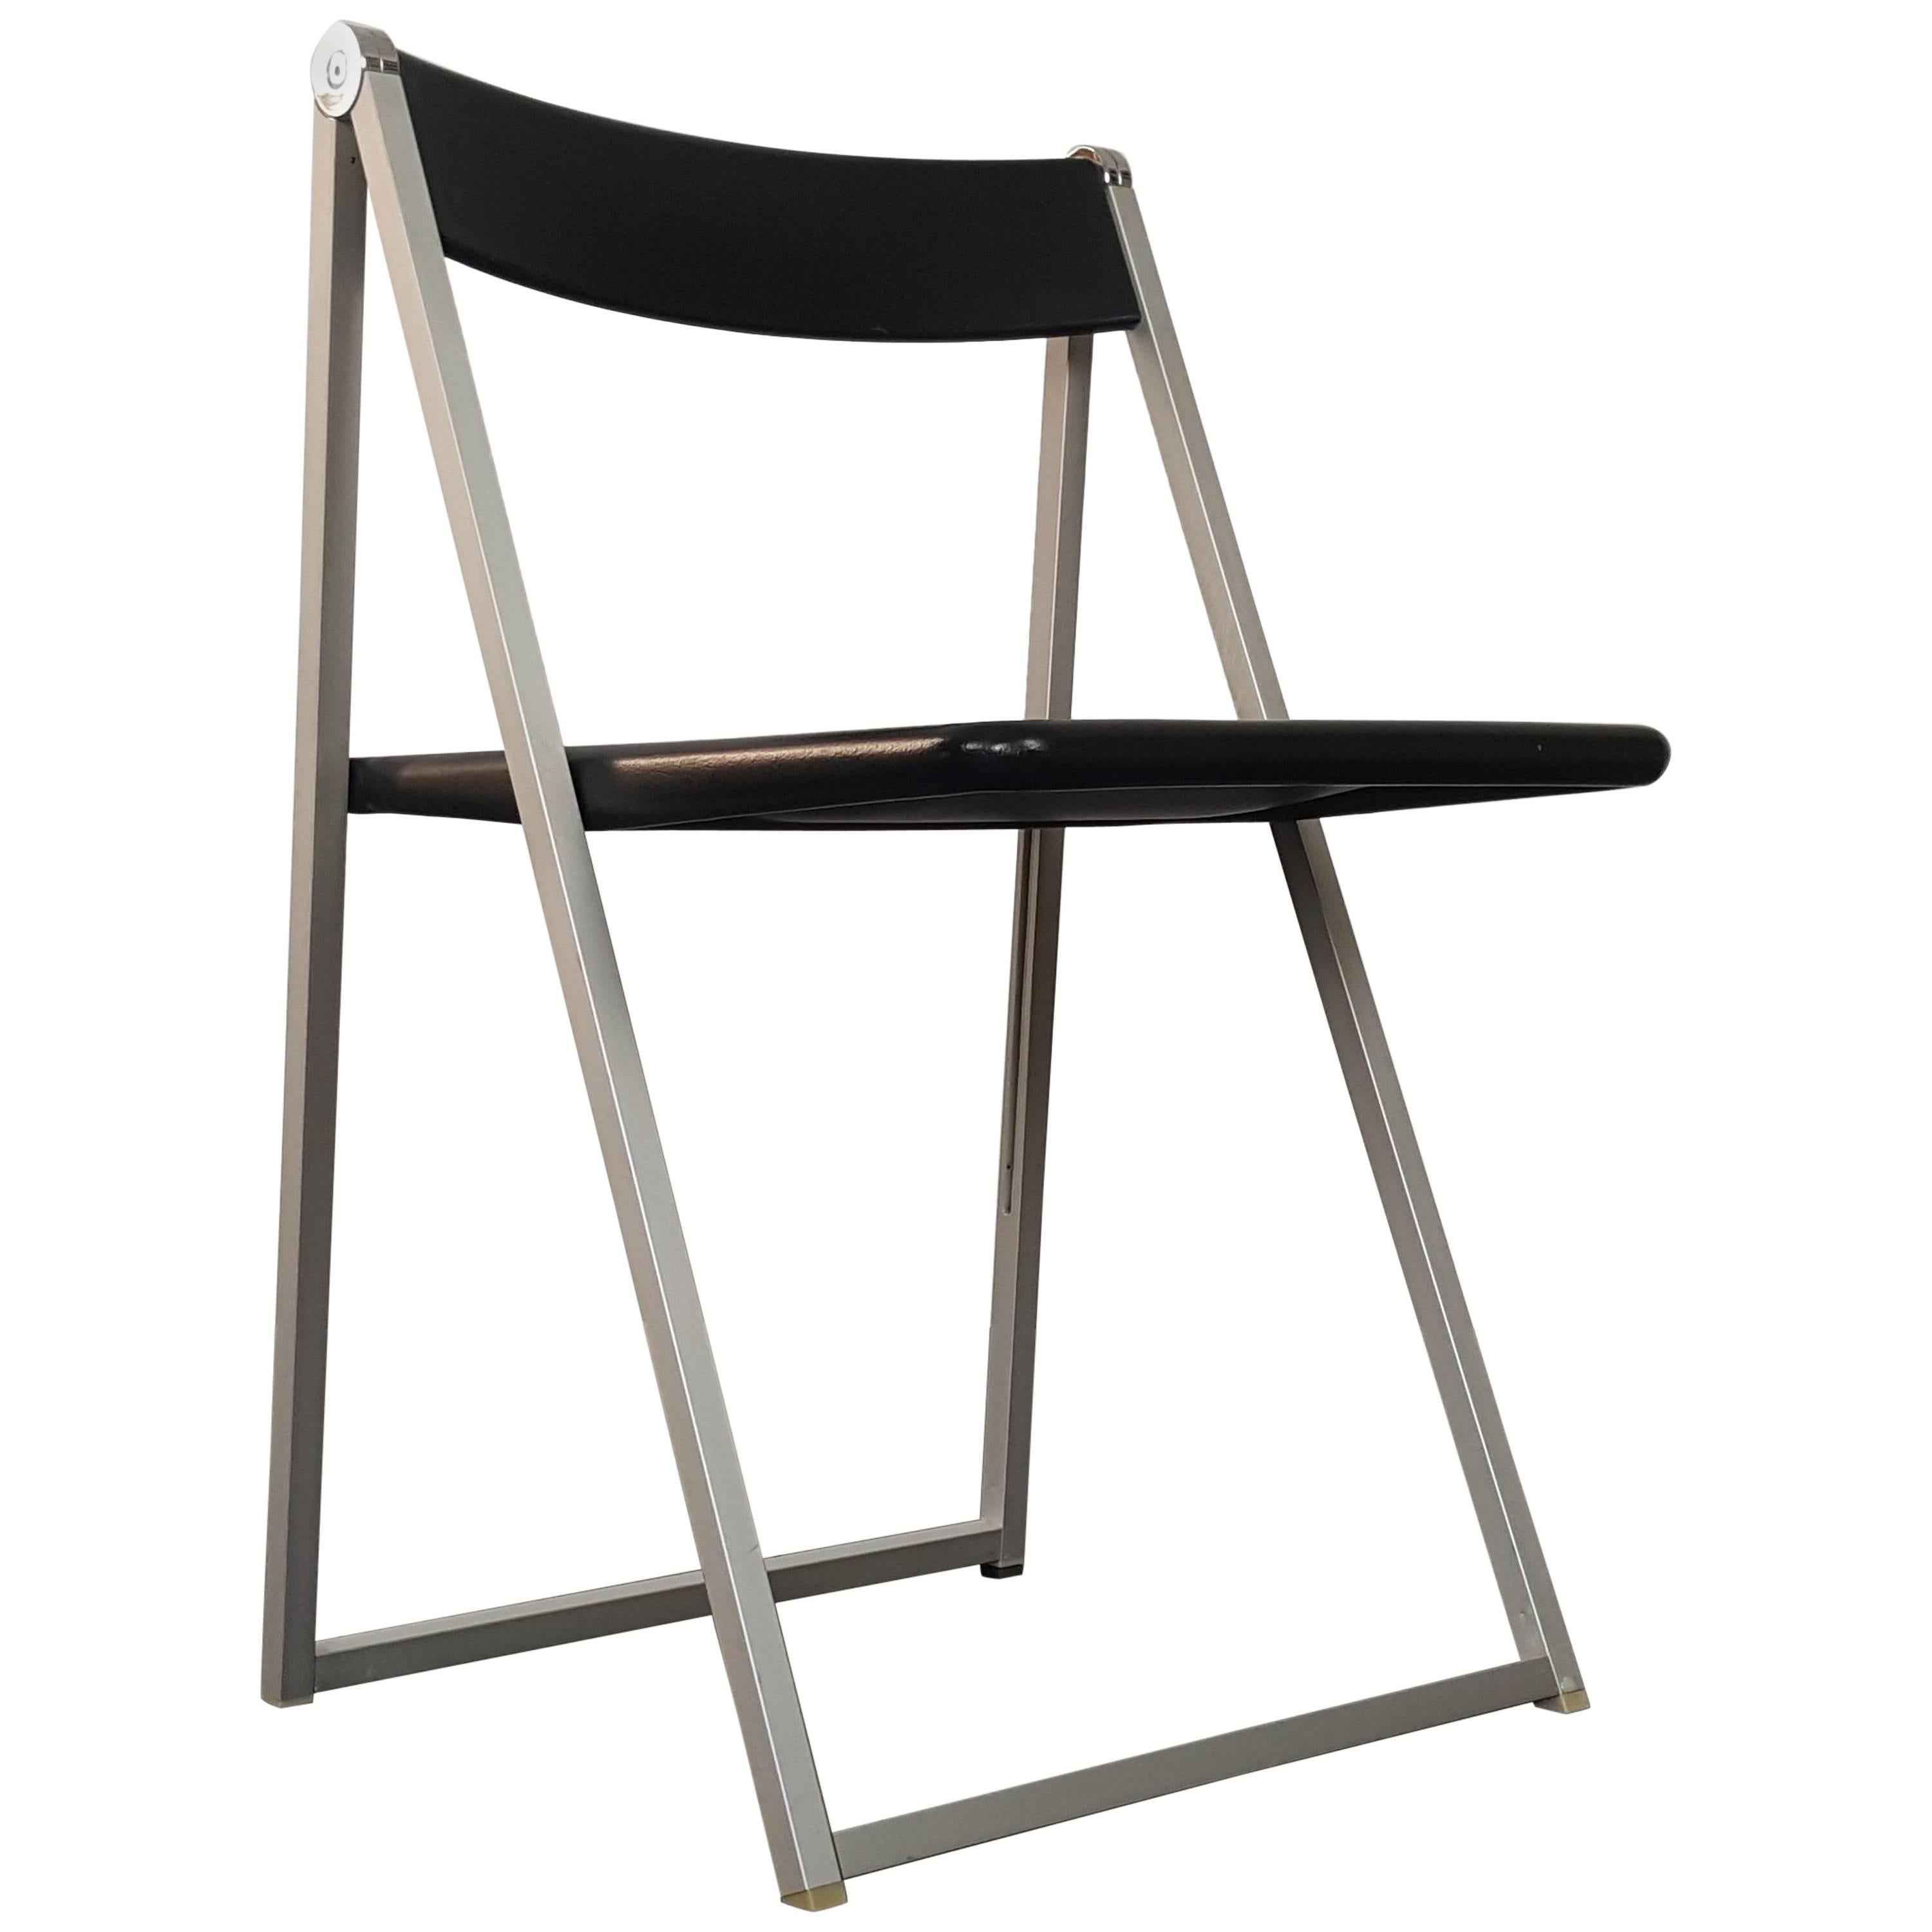 Folding Chair, Designed in 1971 by Team Form AG, Manufactured by Interlübke